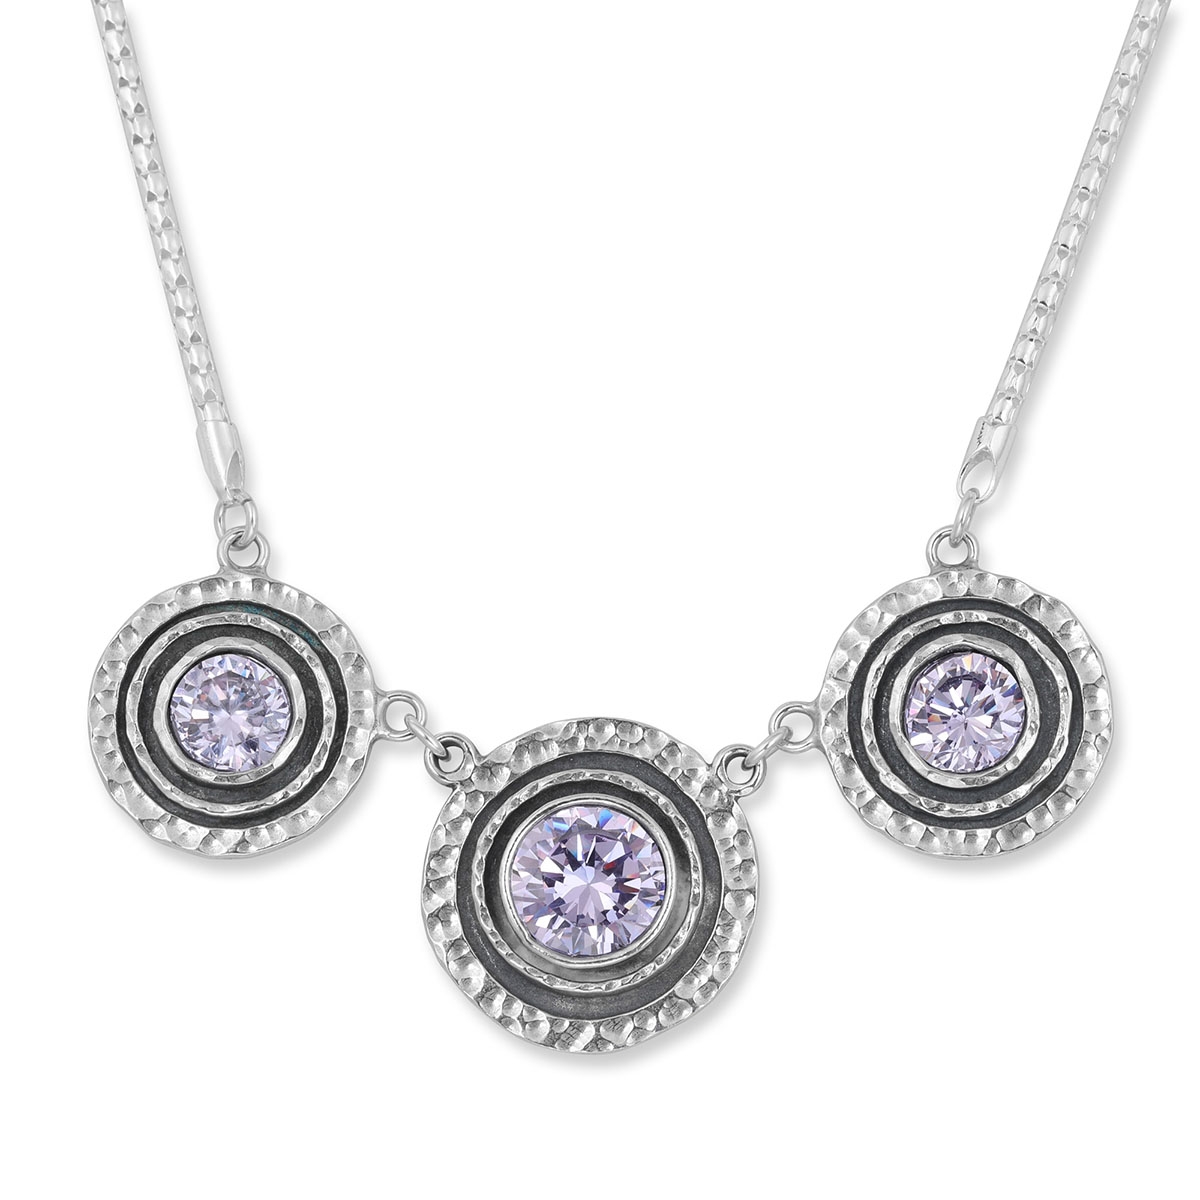 Rafael Jewelry Triple Sterling Silver Hammered Necklace – Lavender - 1